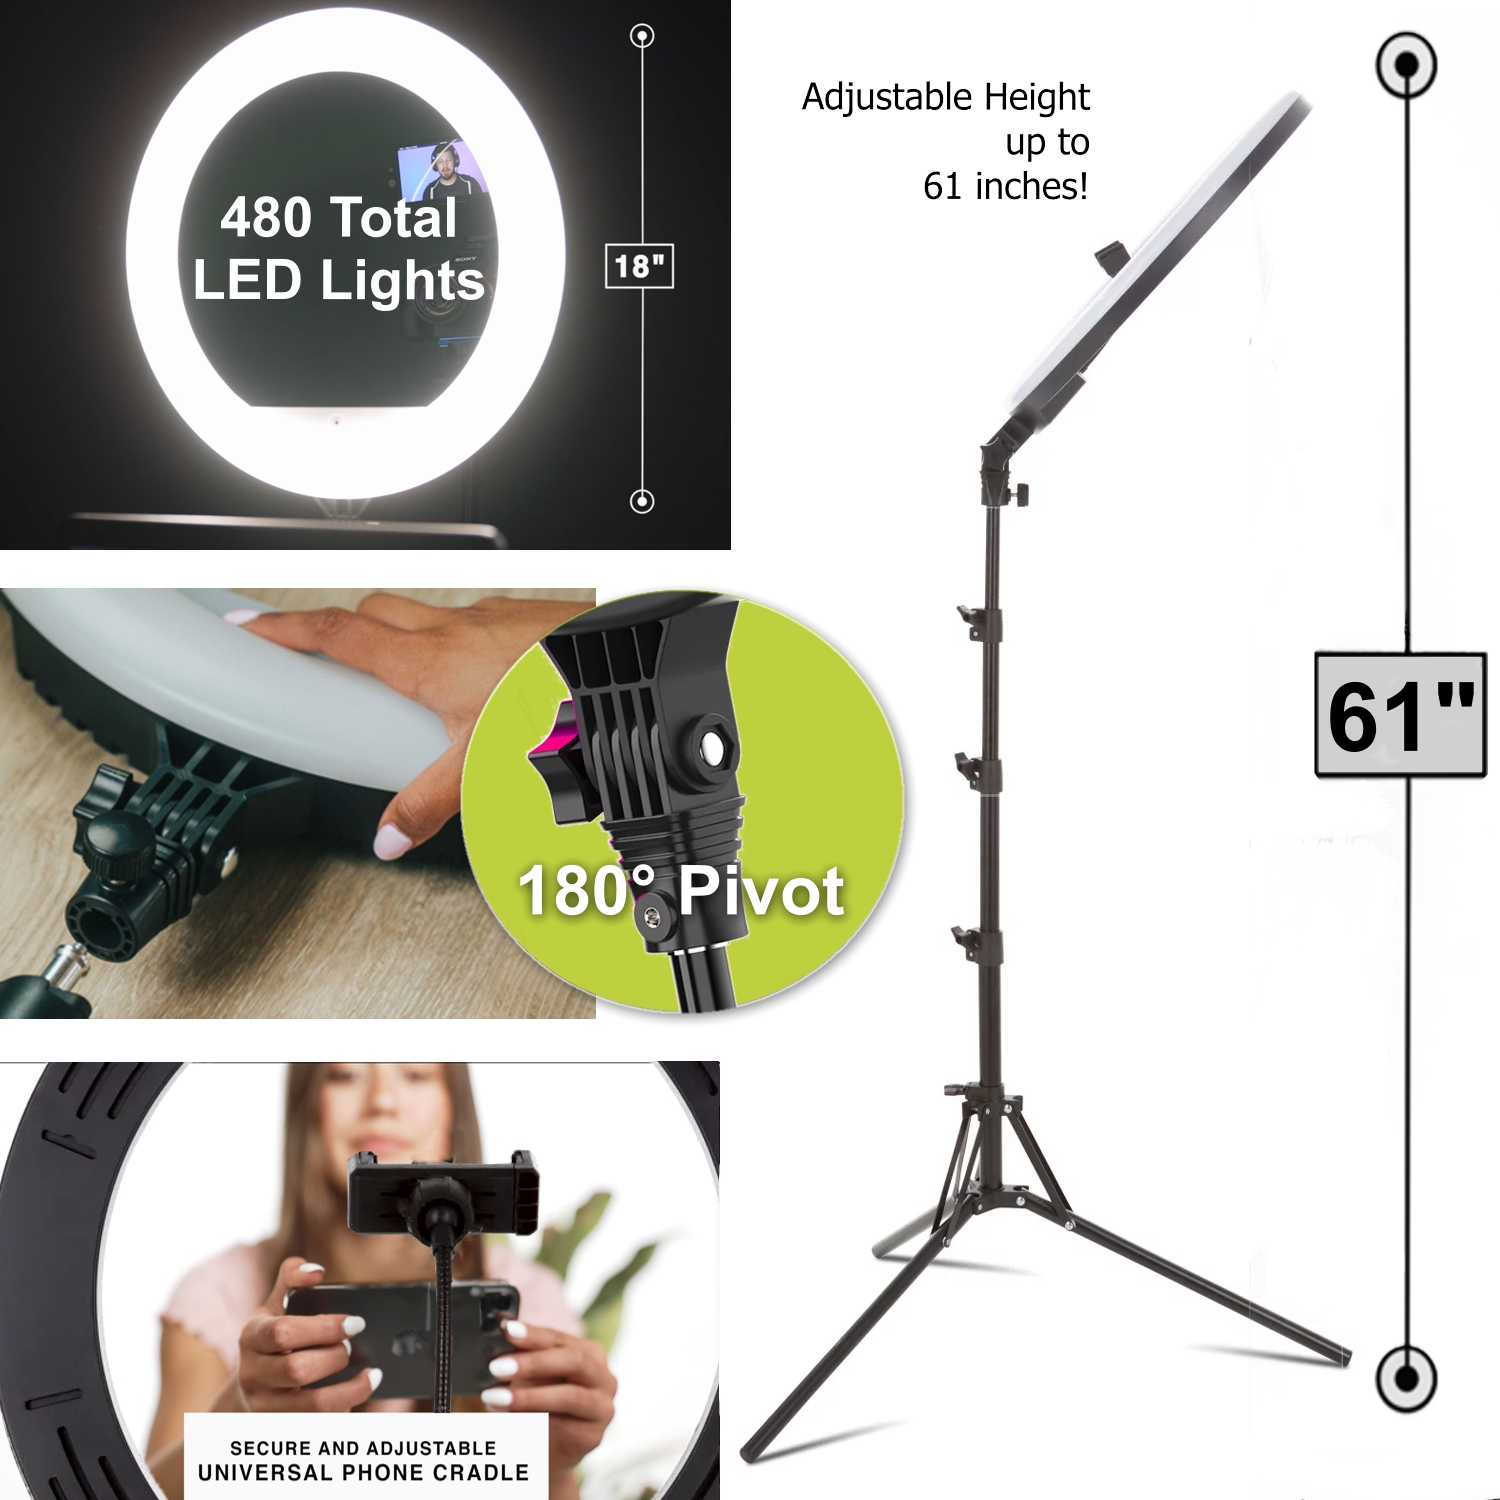 Vivitar 18" LED RGB Ring Light with Tripod, Phone Holder USB Charging Ports, and Wireless Remote - image 3 of 13